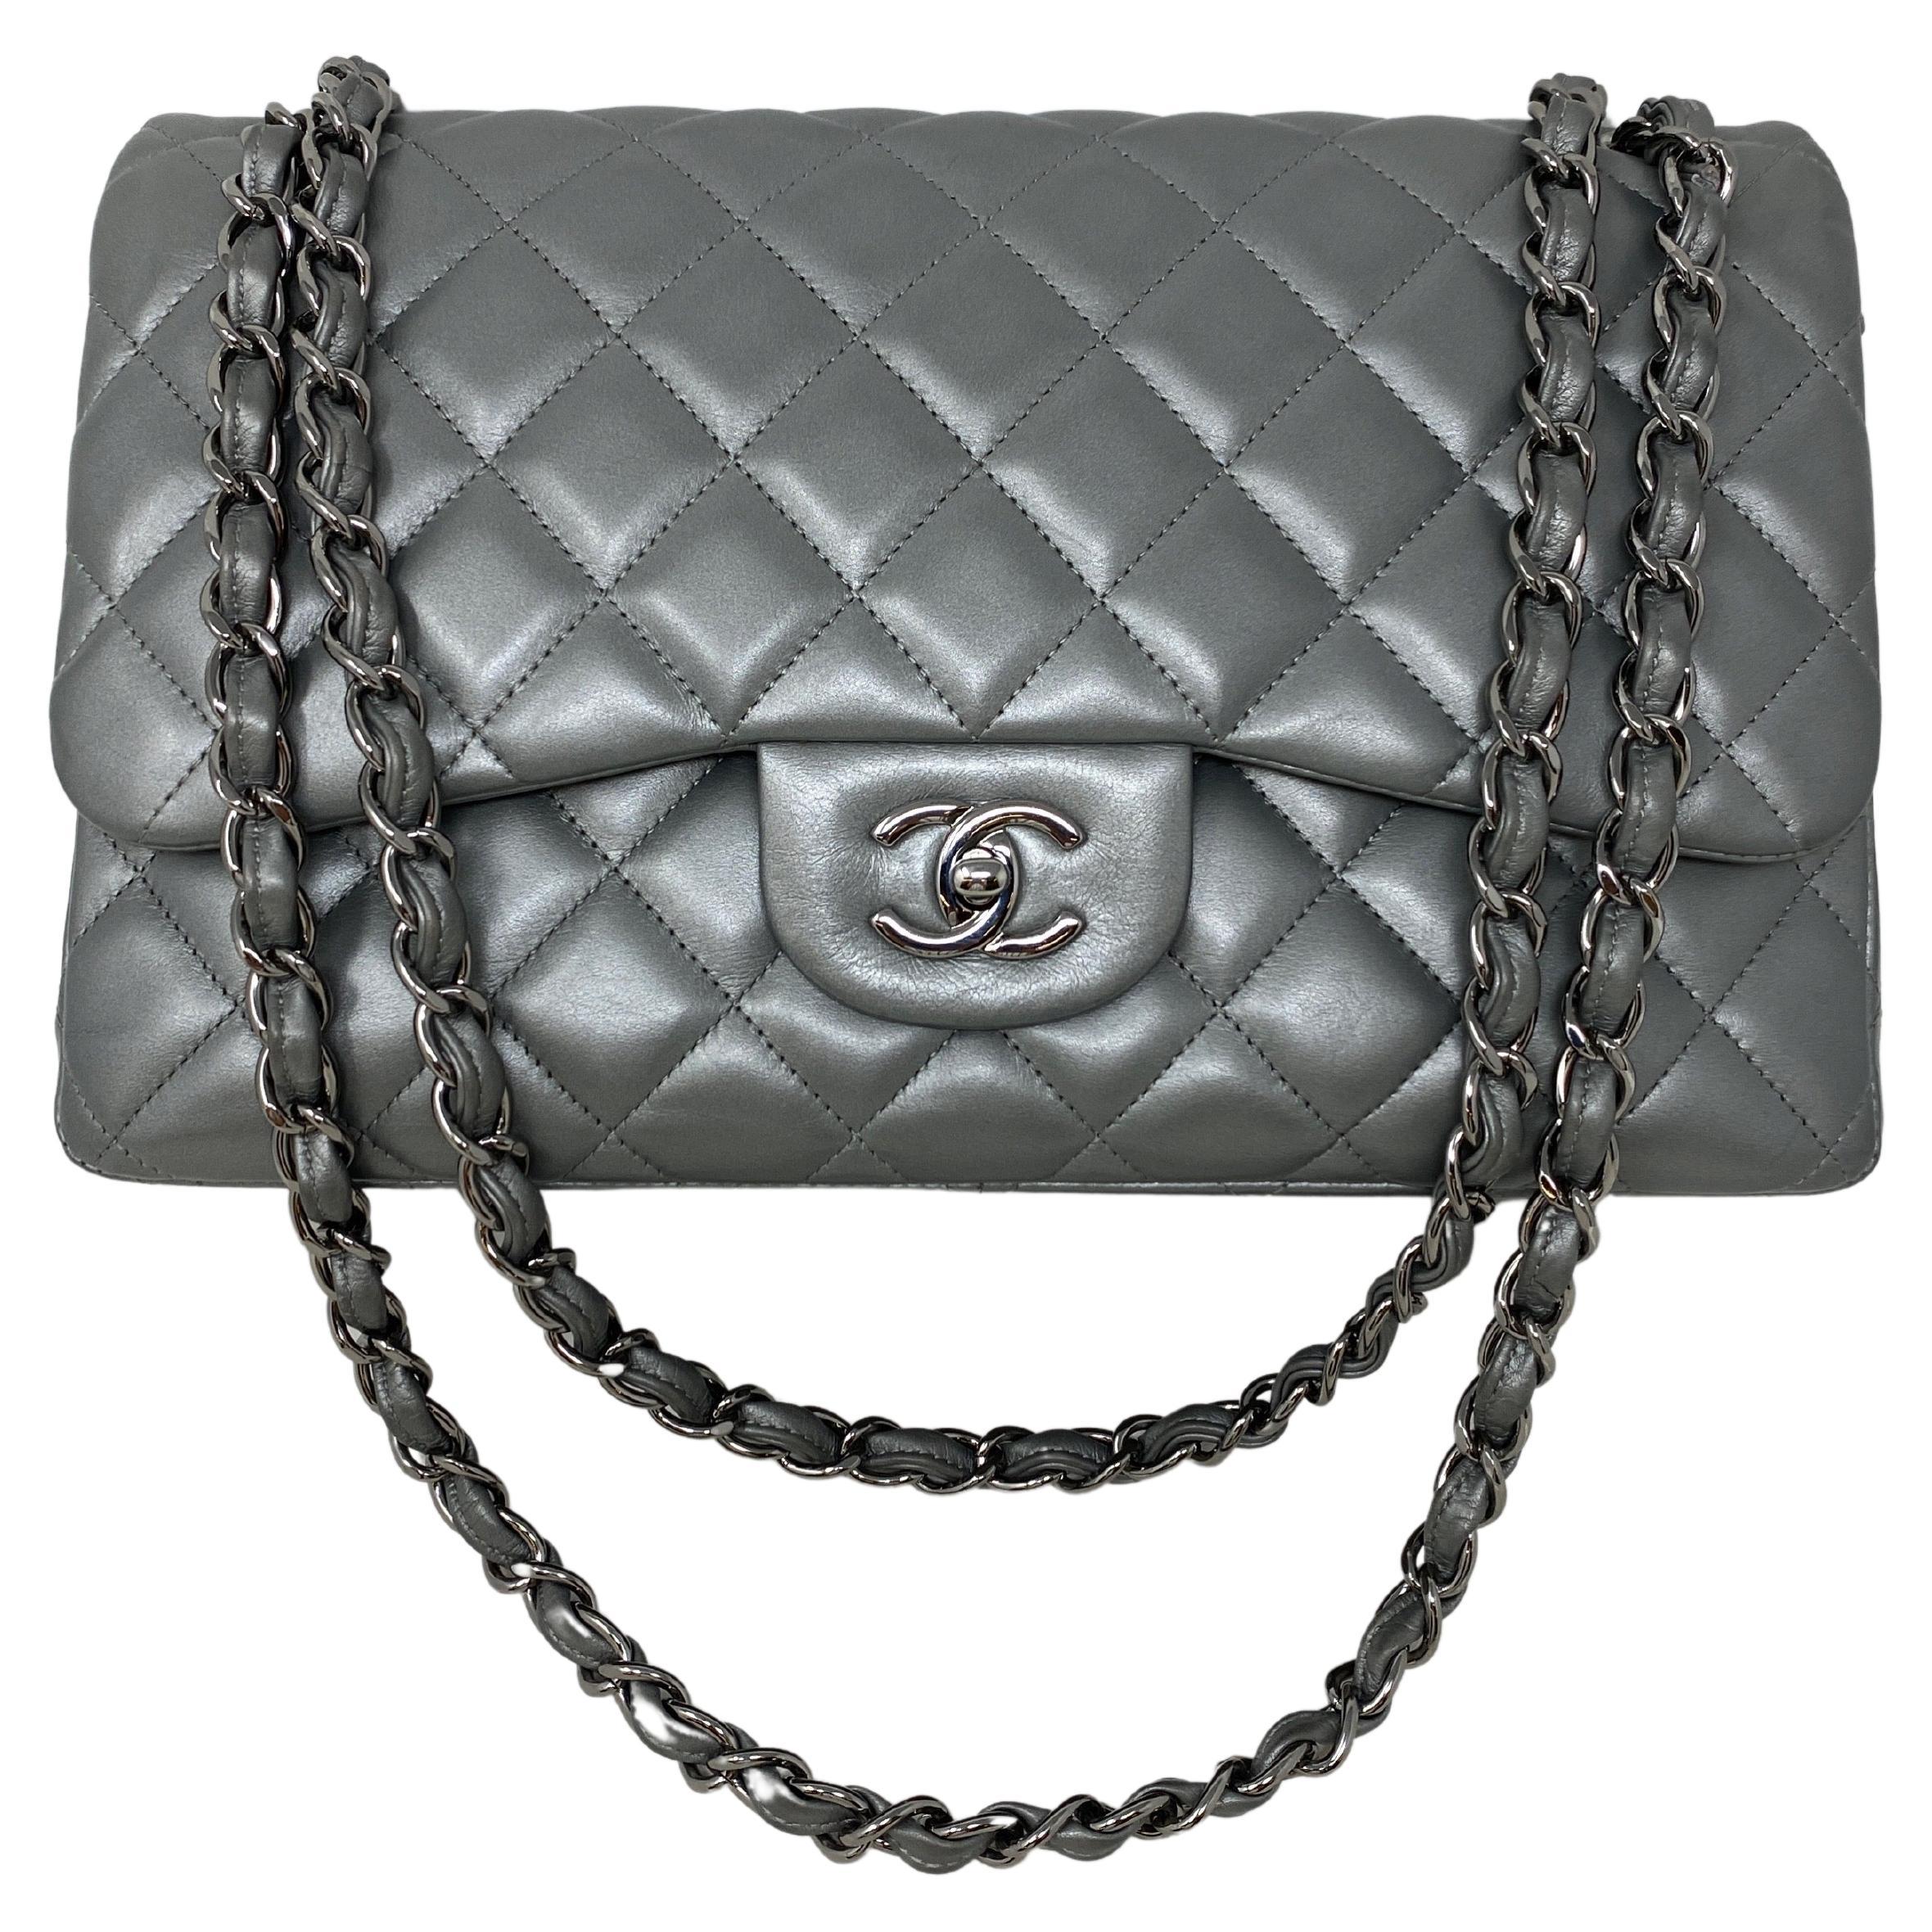 Chanel Silver Bag - 1,152 For Sale on 1stDibs